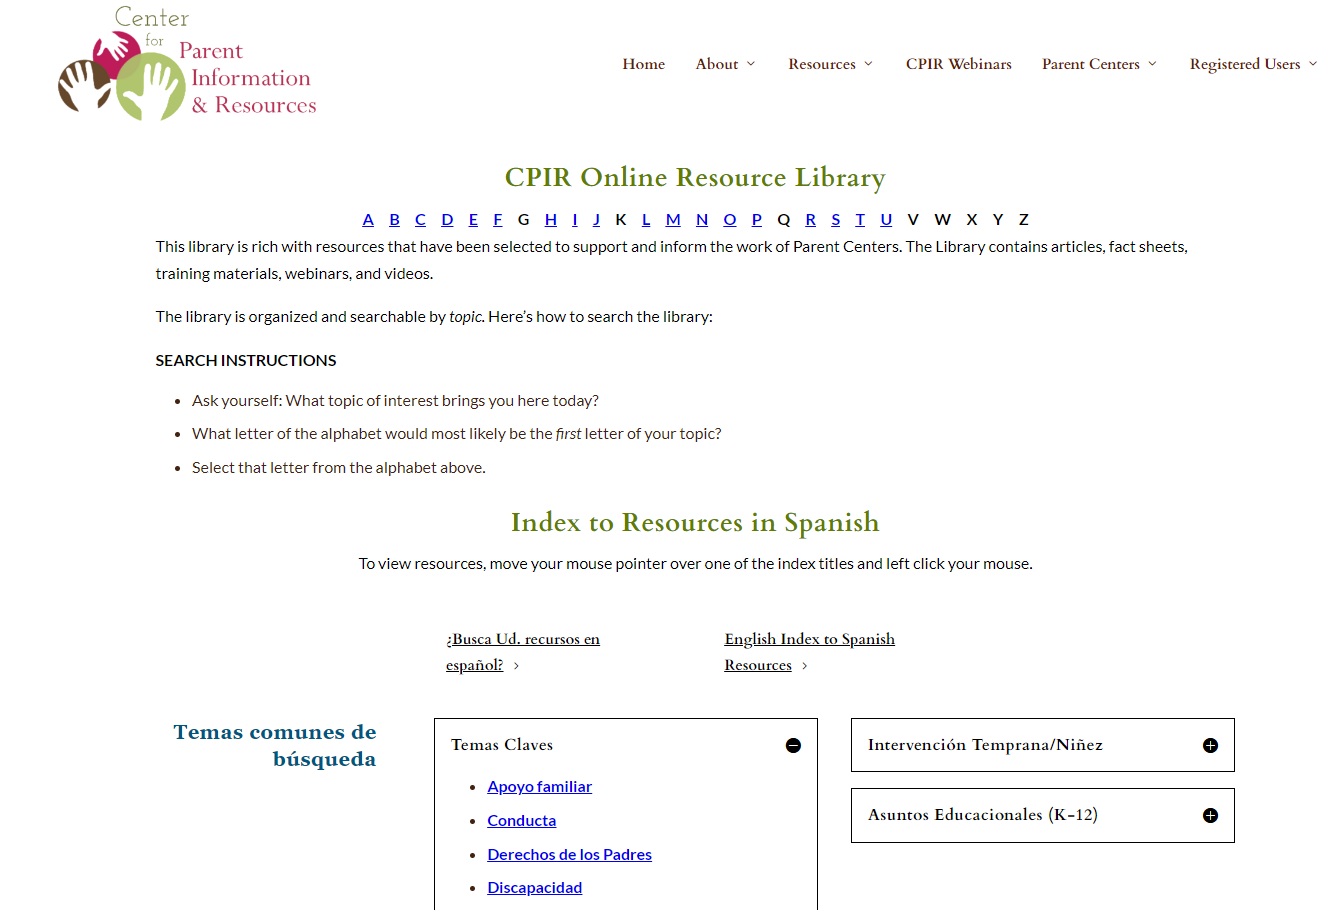 The Center for Parent Information Resources